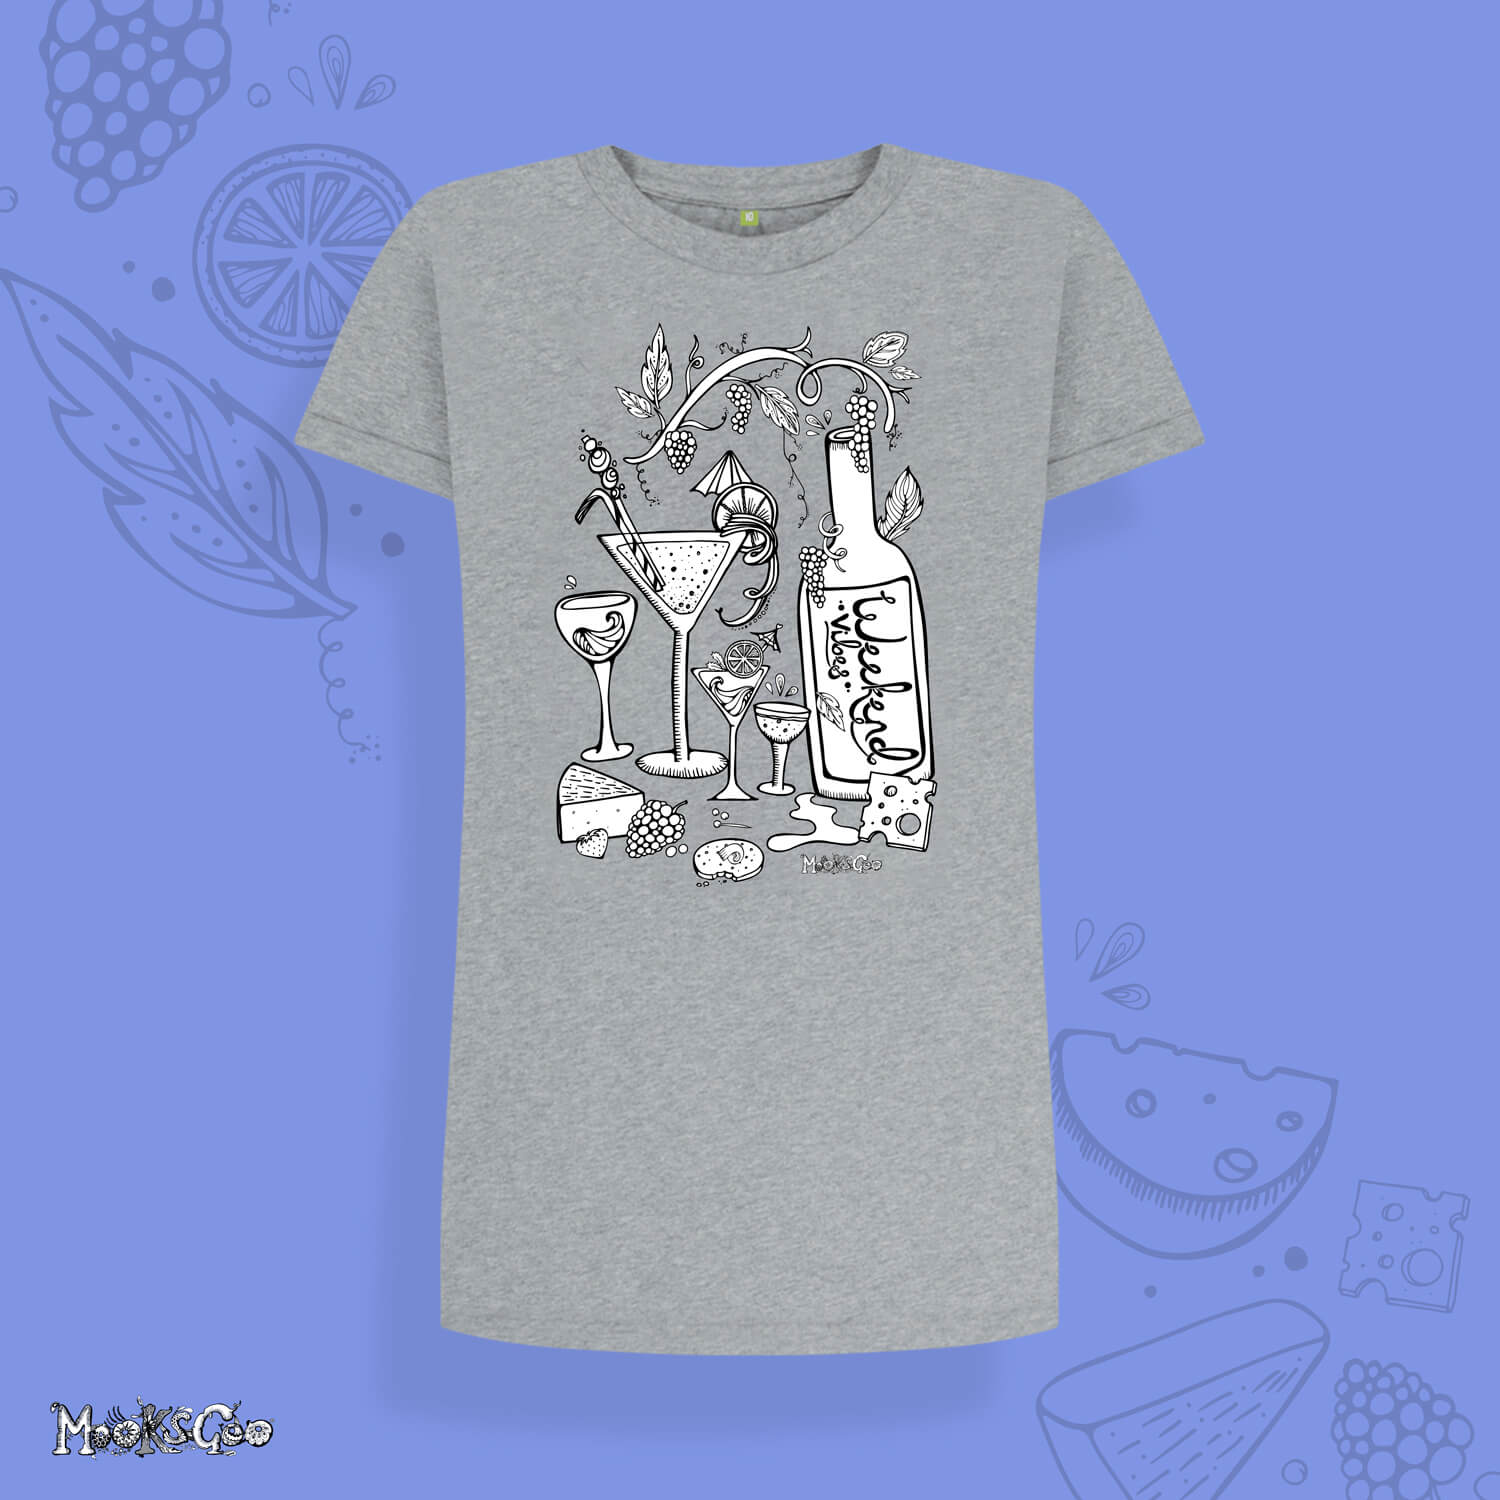 Athletic Grey oversized t-shirt dress with bold black and white picture of cheese and wine themed illustration on a long, oversized and relaxed t-shirt dress. It shows a bottle of wine, cocktails, brie cheese, grapes and biscuits - great for a girly night in clothing. Designed by MooksGoo  